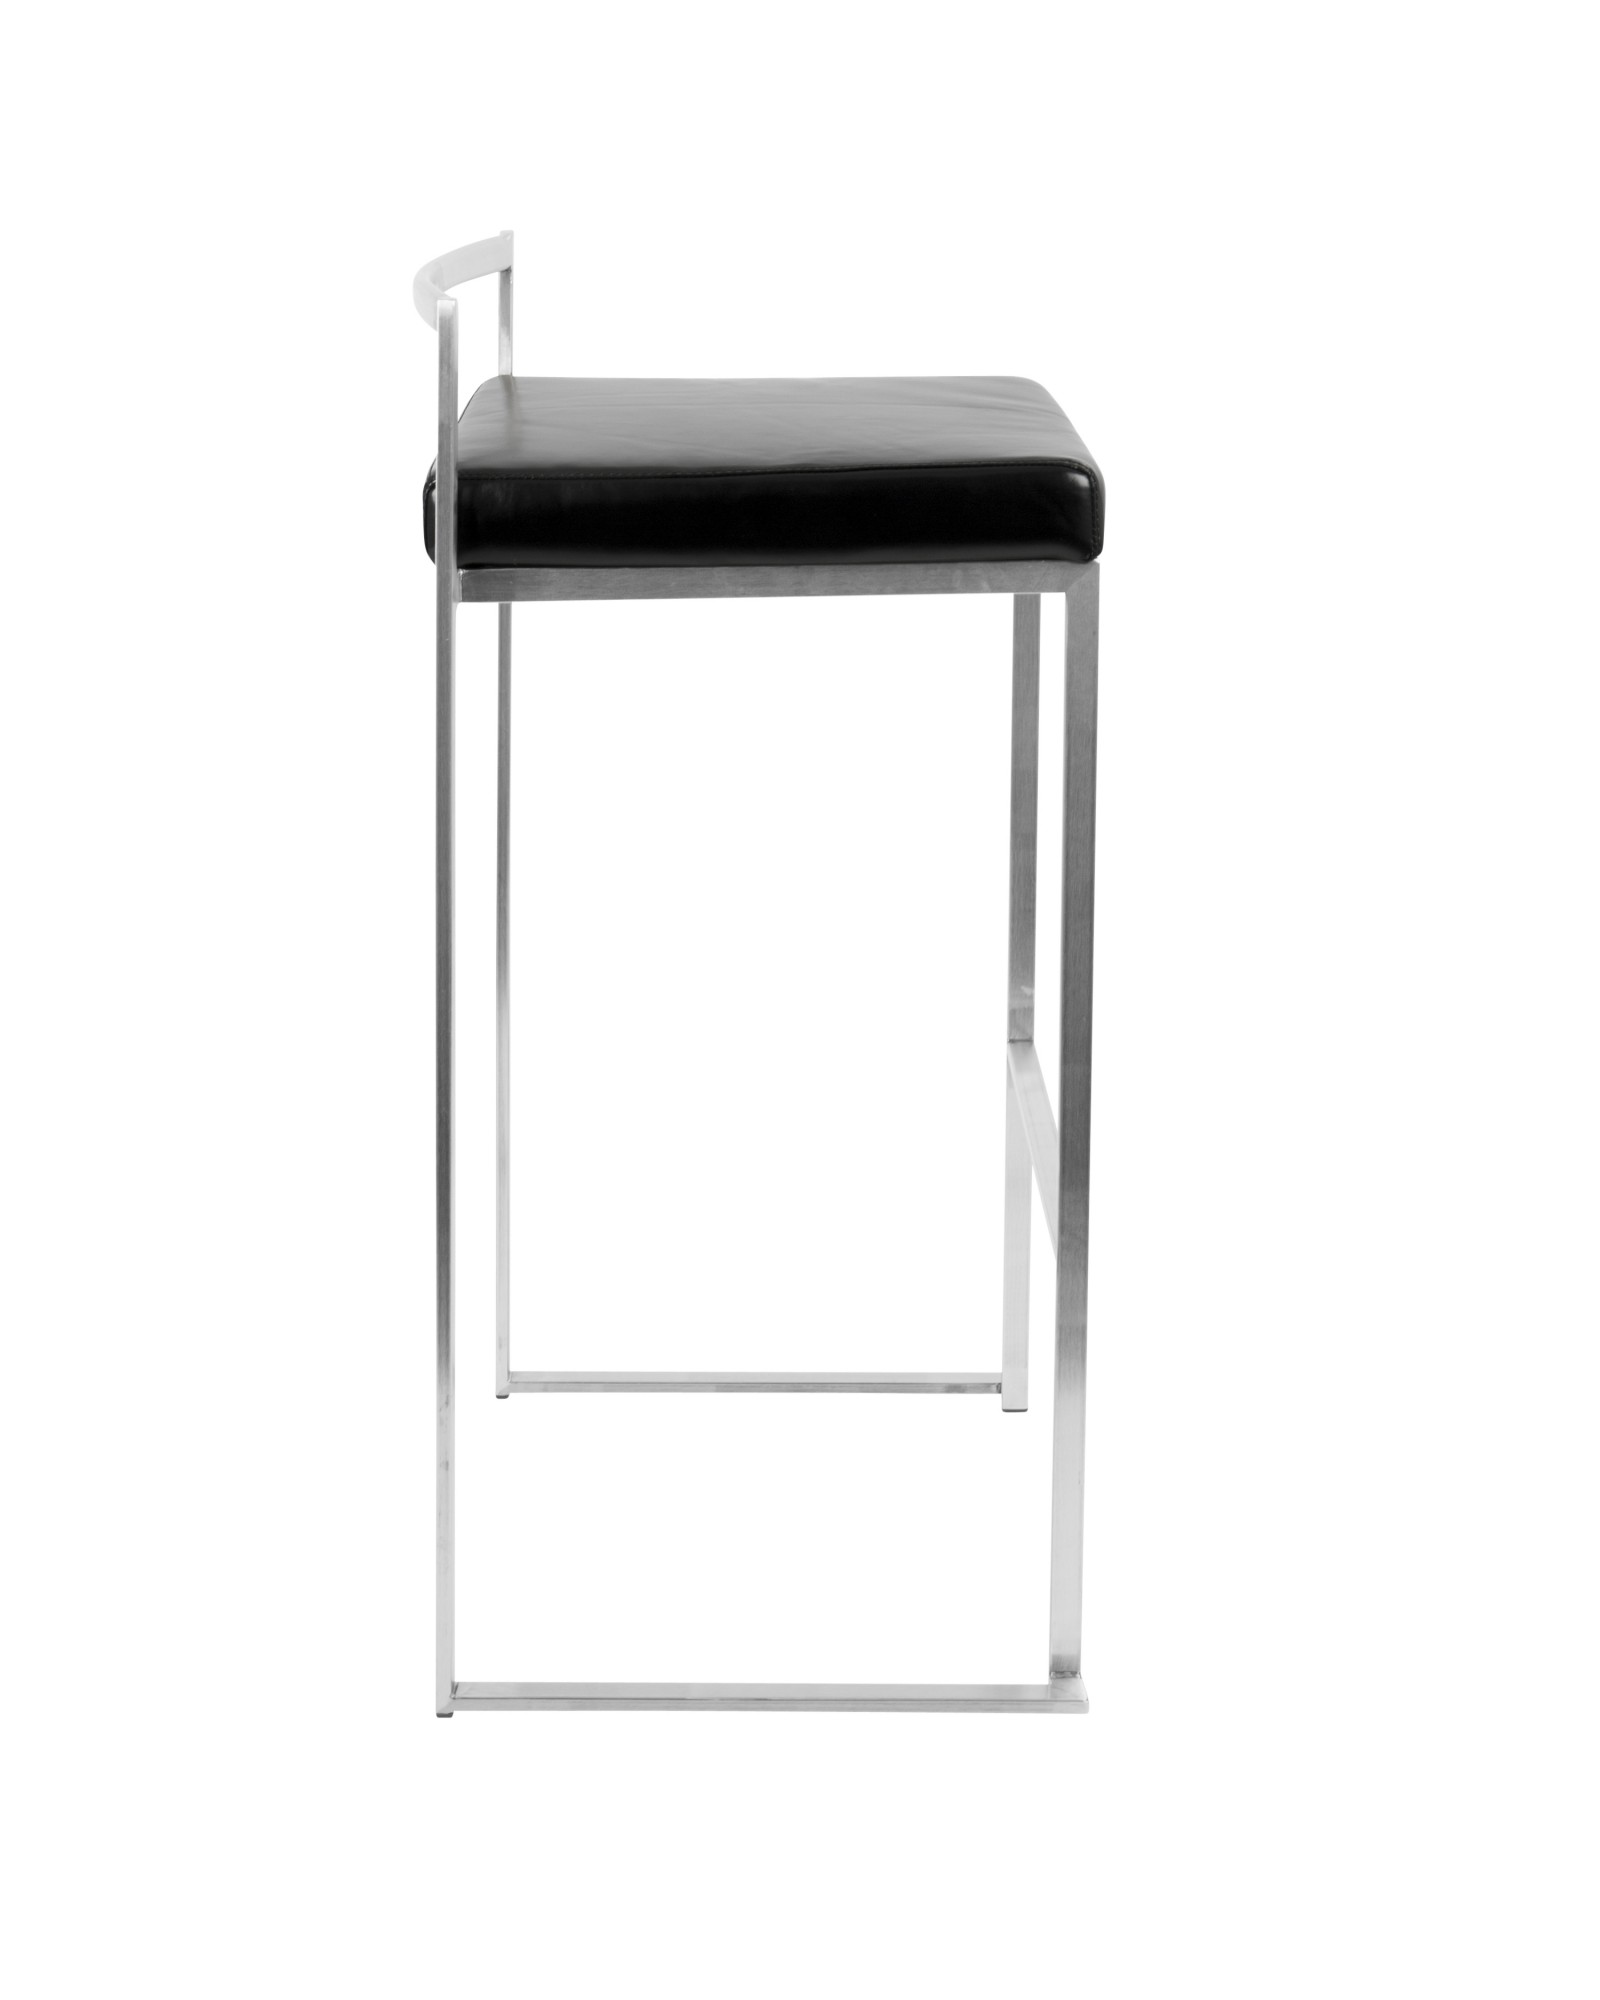 Fuji Contemporary Stackable Barstool with Black Faux Leather - Set of 2